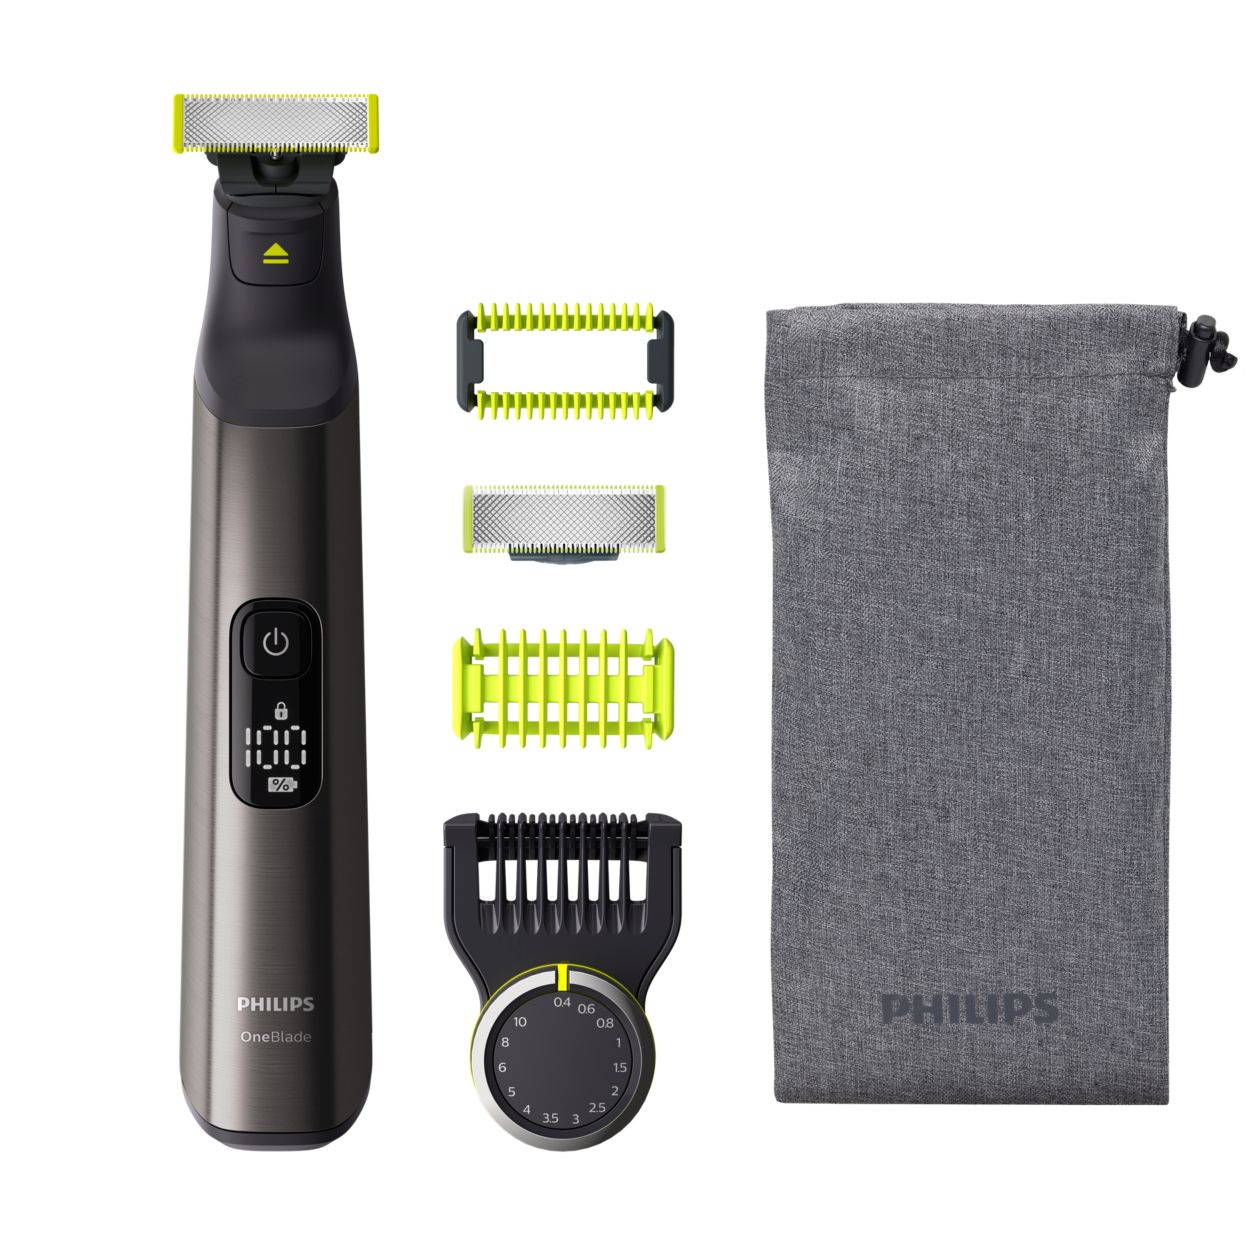 Face OneBlade Pro Philips + | Body QP6550/30